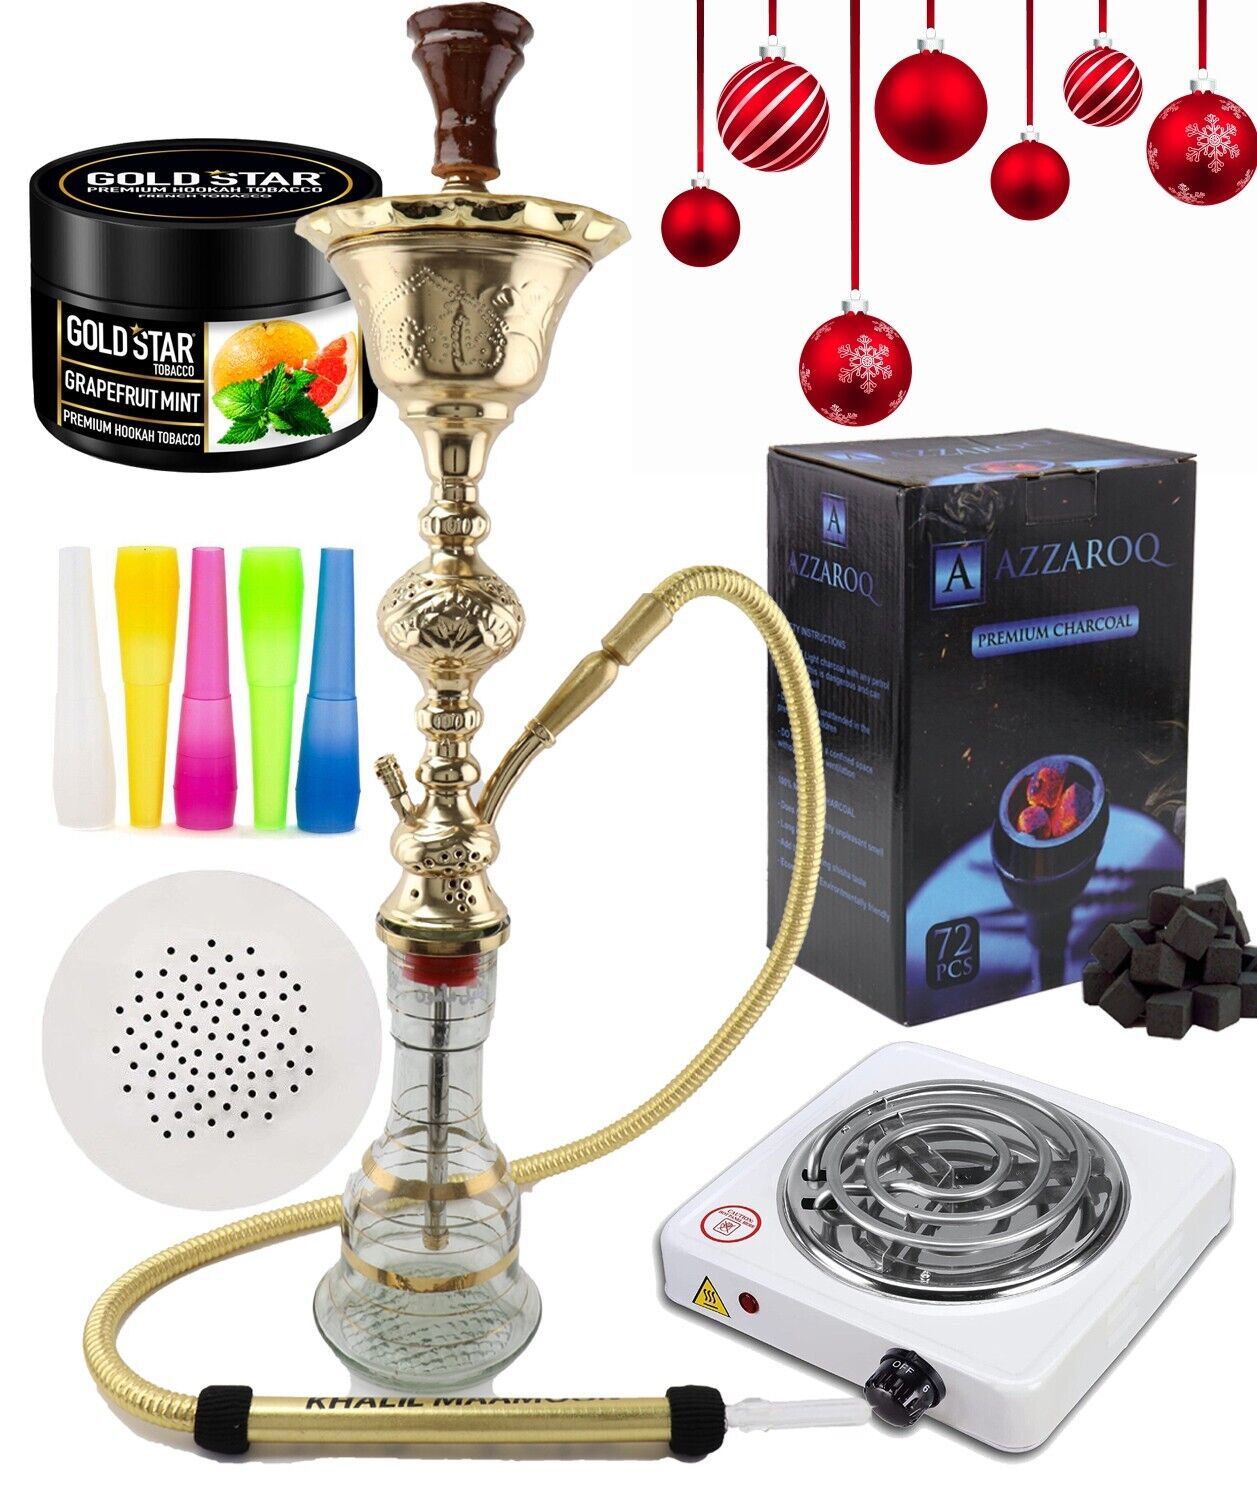 Khalil Mamoon 32 1-Hose Ice Bucket Hookah Complete Set Bundle *Holiday Special*. Available Now for 159.95